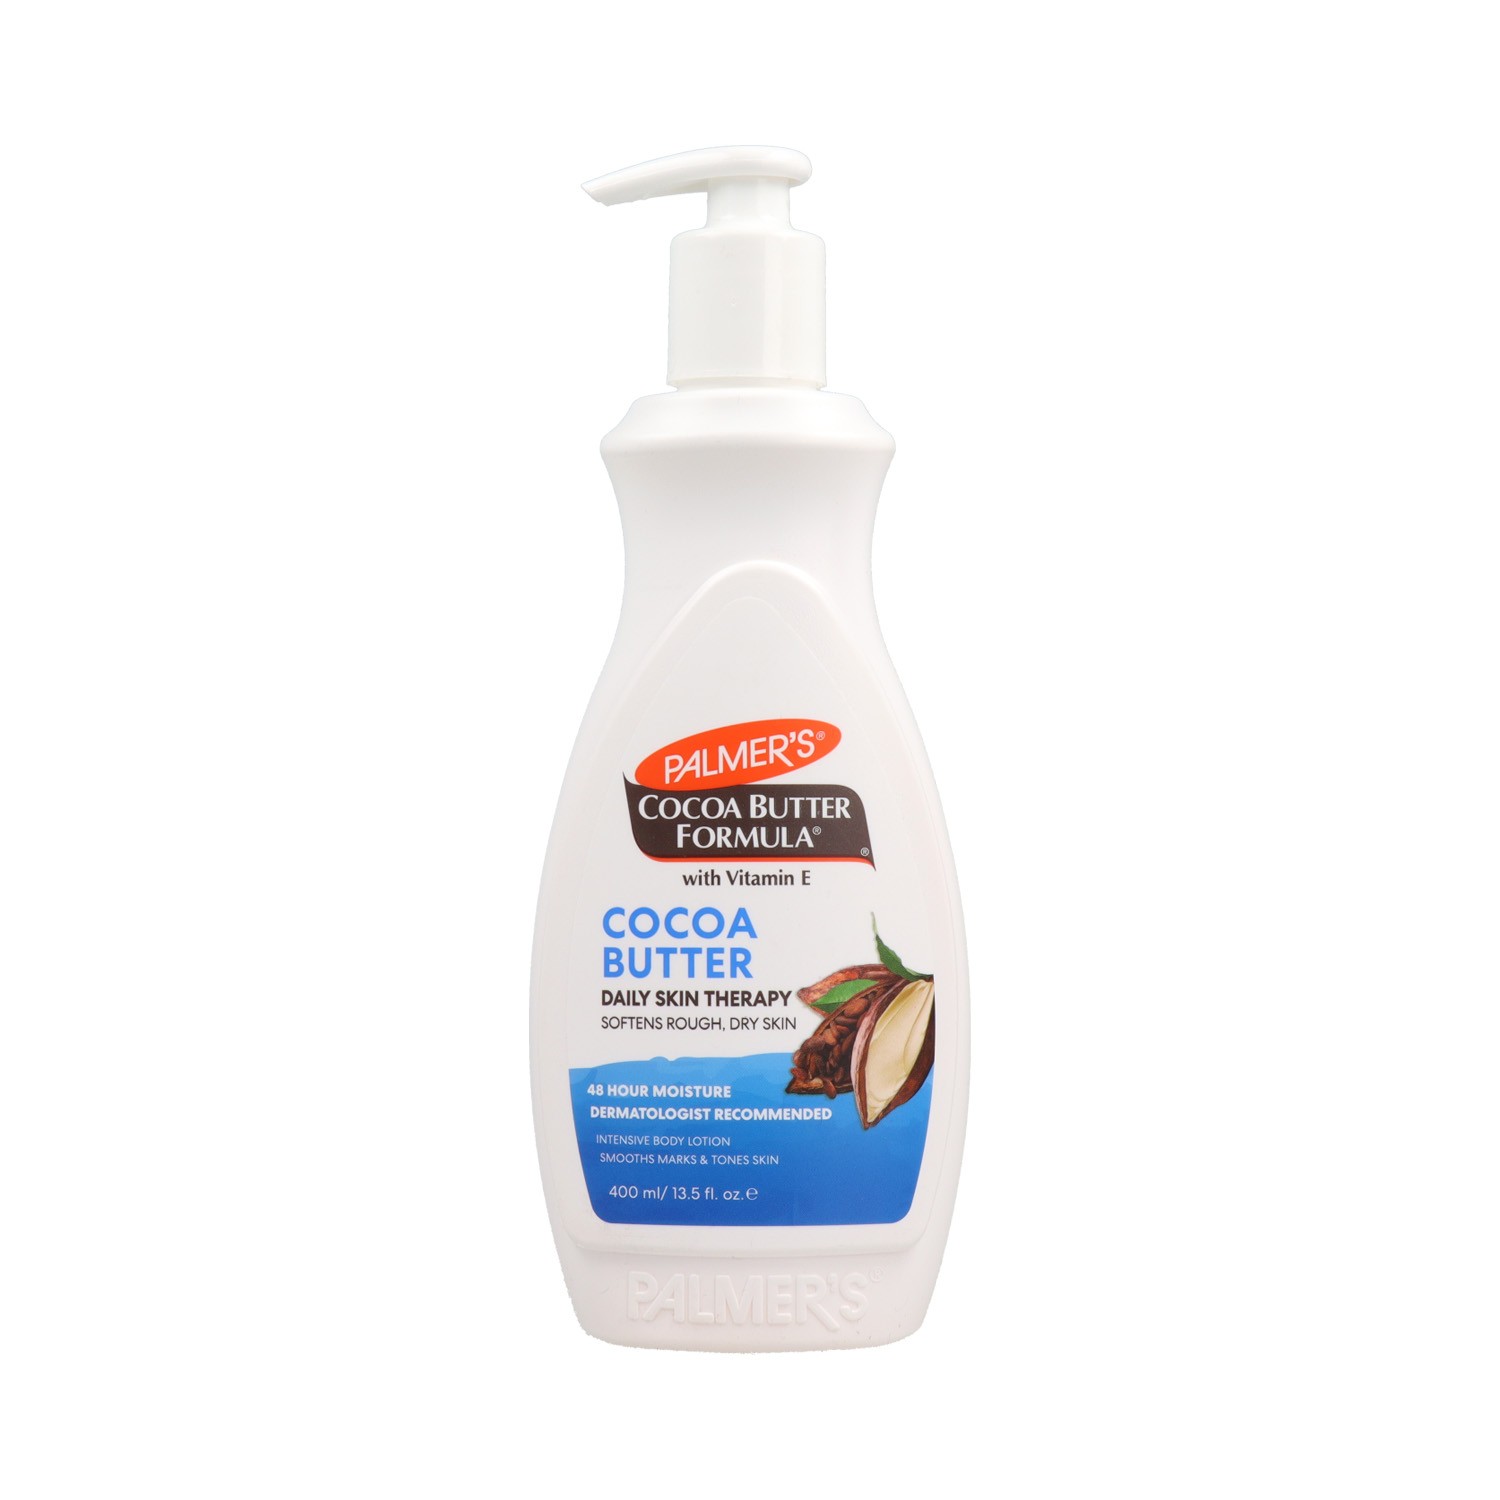 Palmers Cocoa Butter Formule Lotion Pump 400 Ml